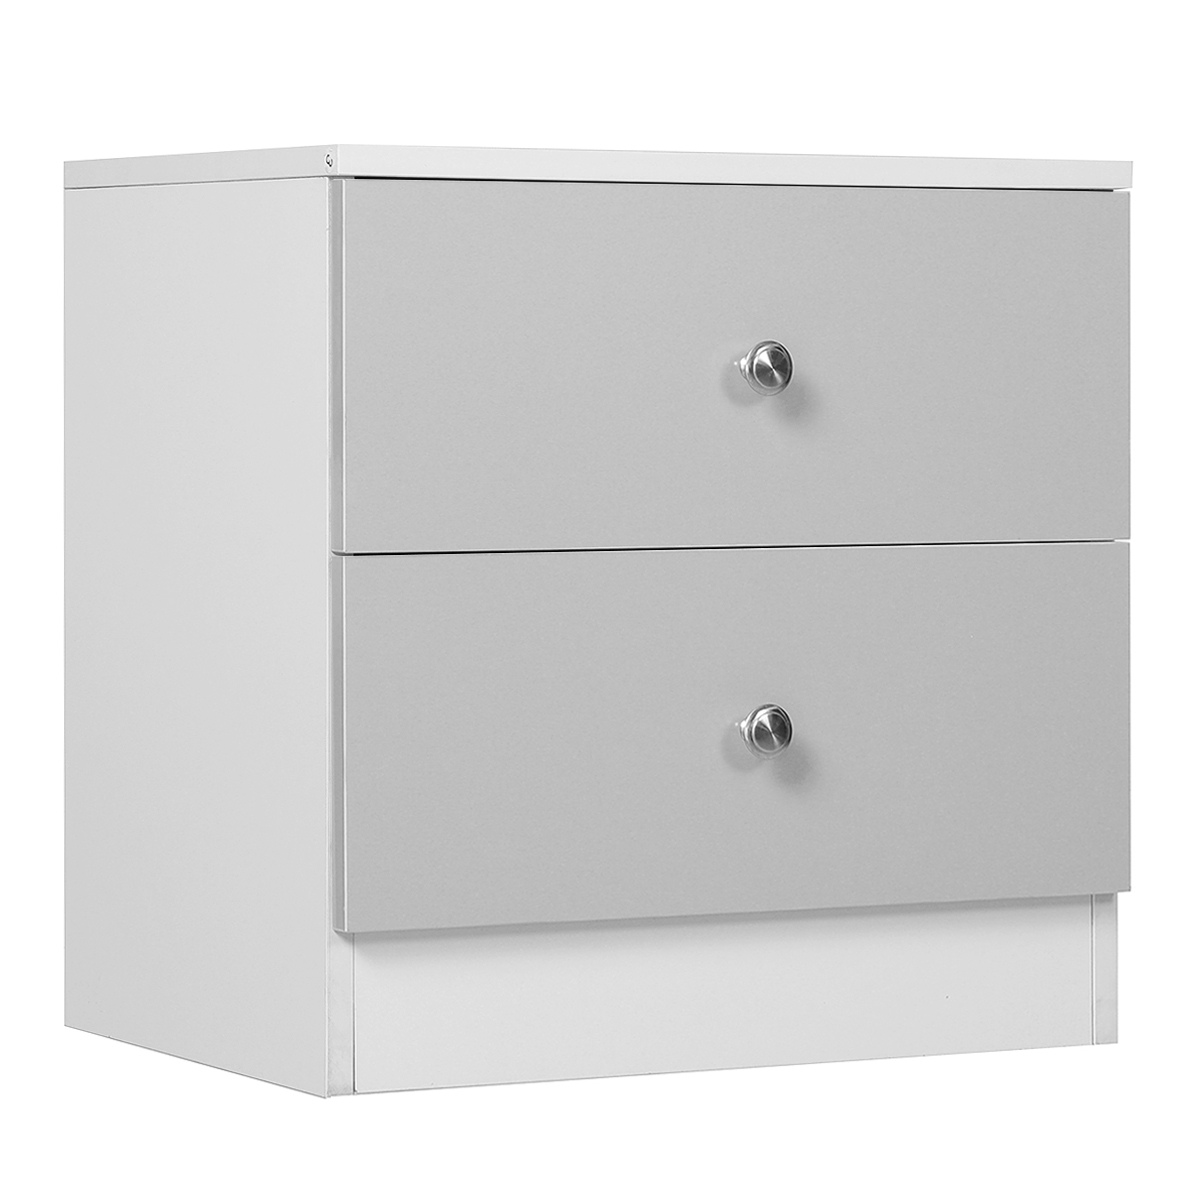 Modern Gray and White Nightstand with Drawers